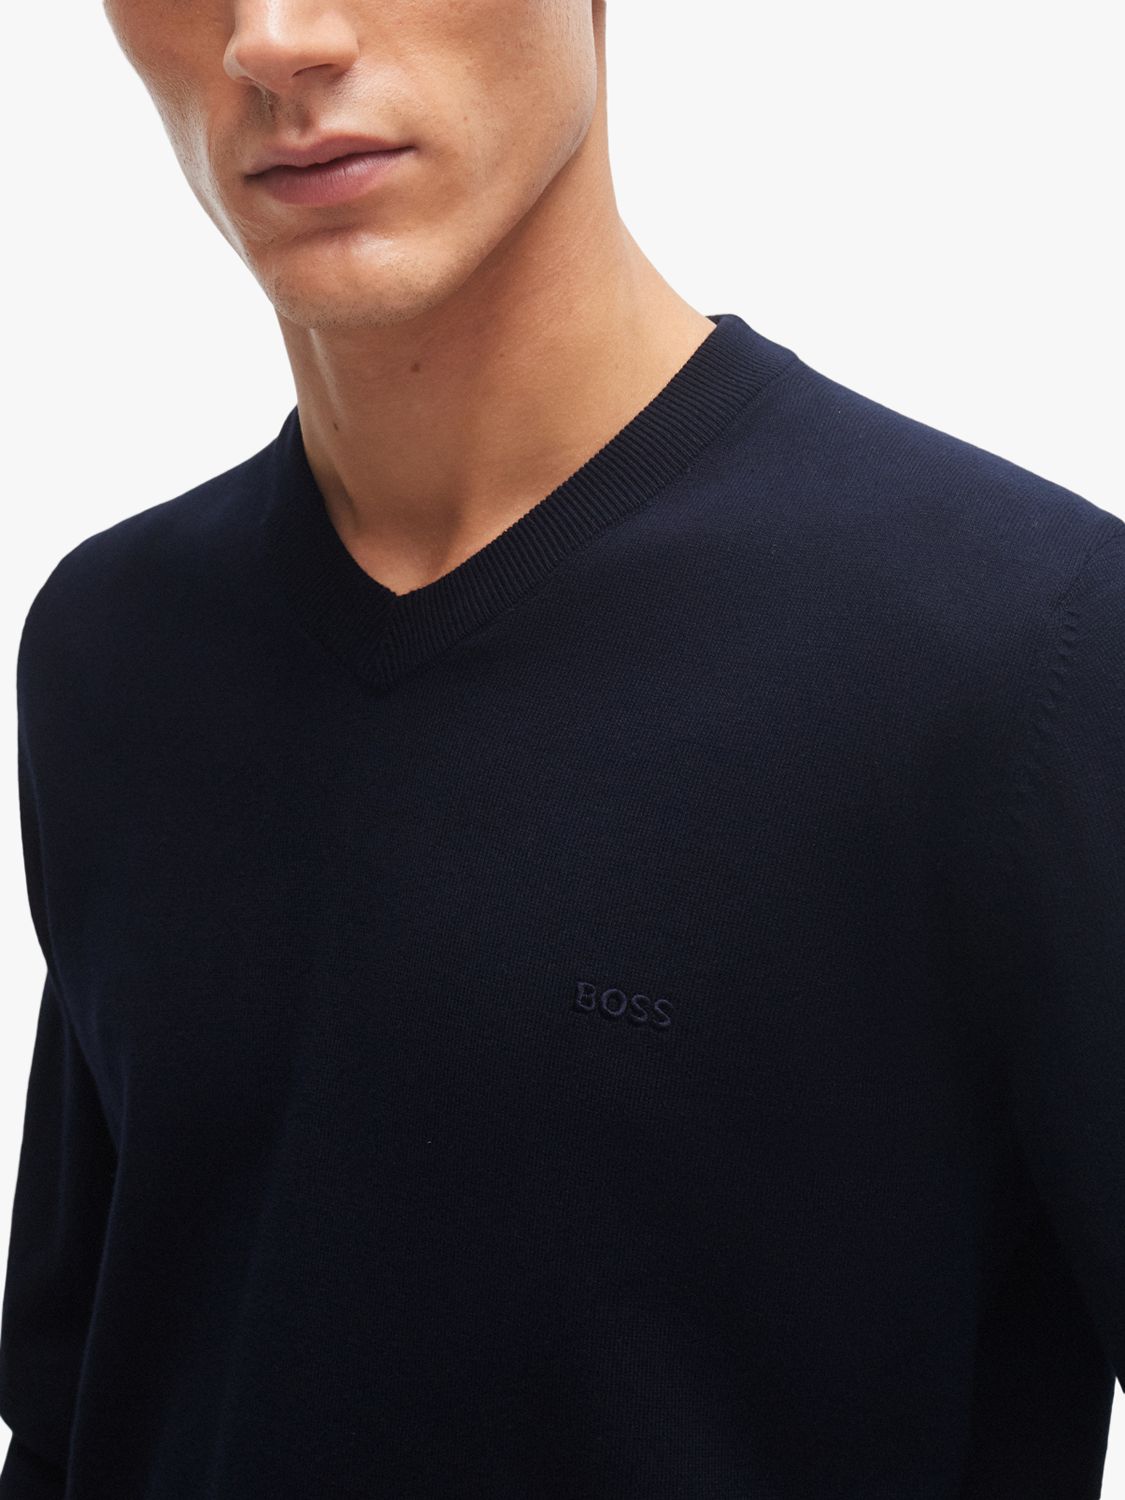 BOSS Pacello Cotton V-Neck Jumper, Navy at John Lewis & Partners